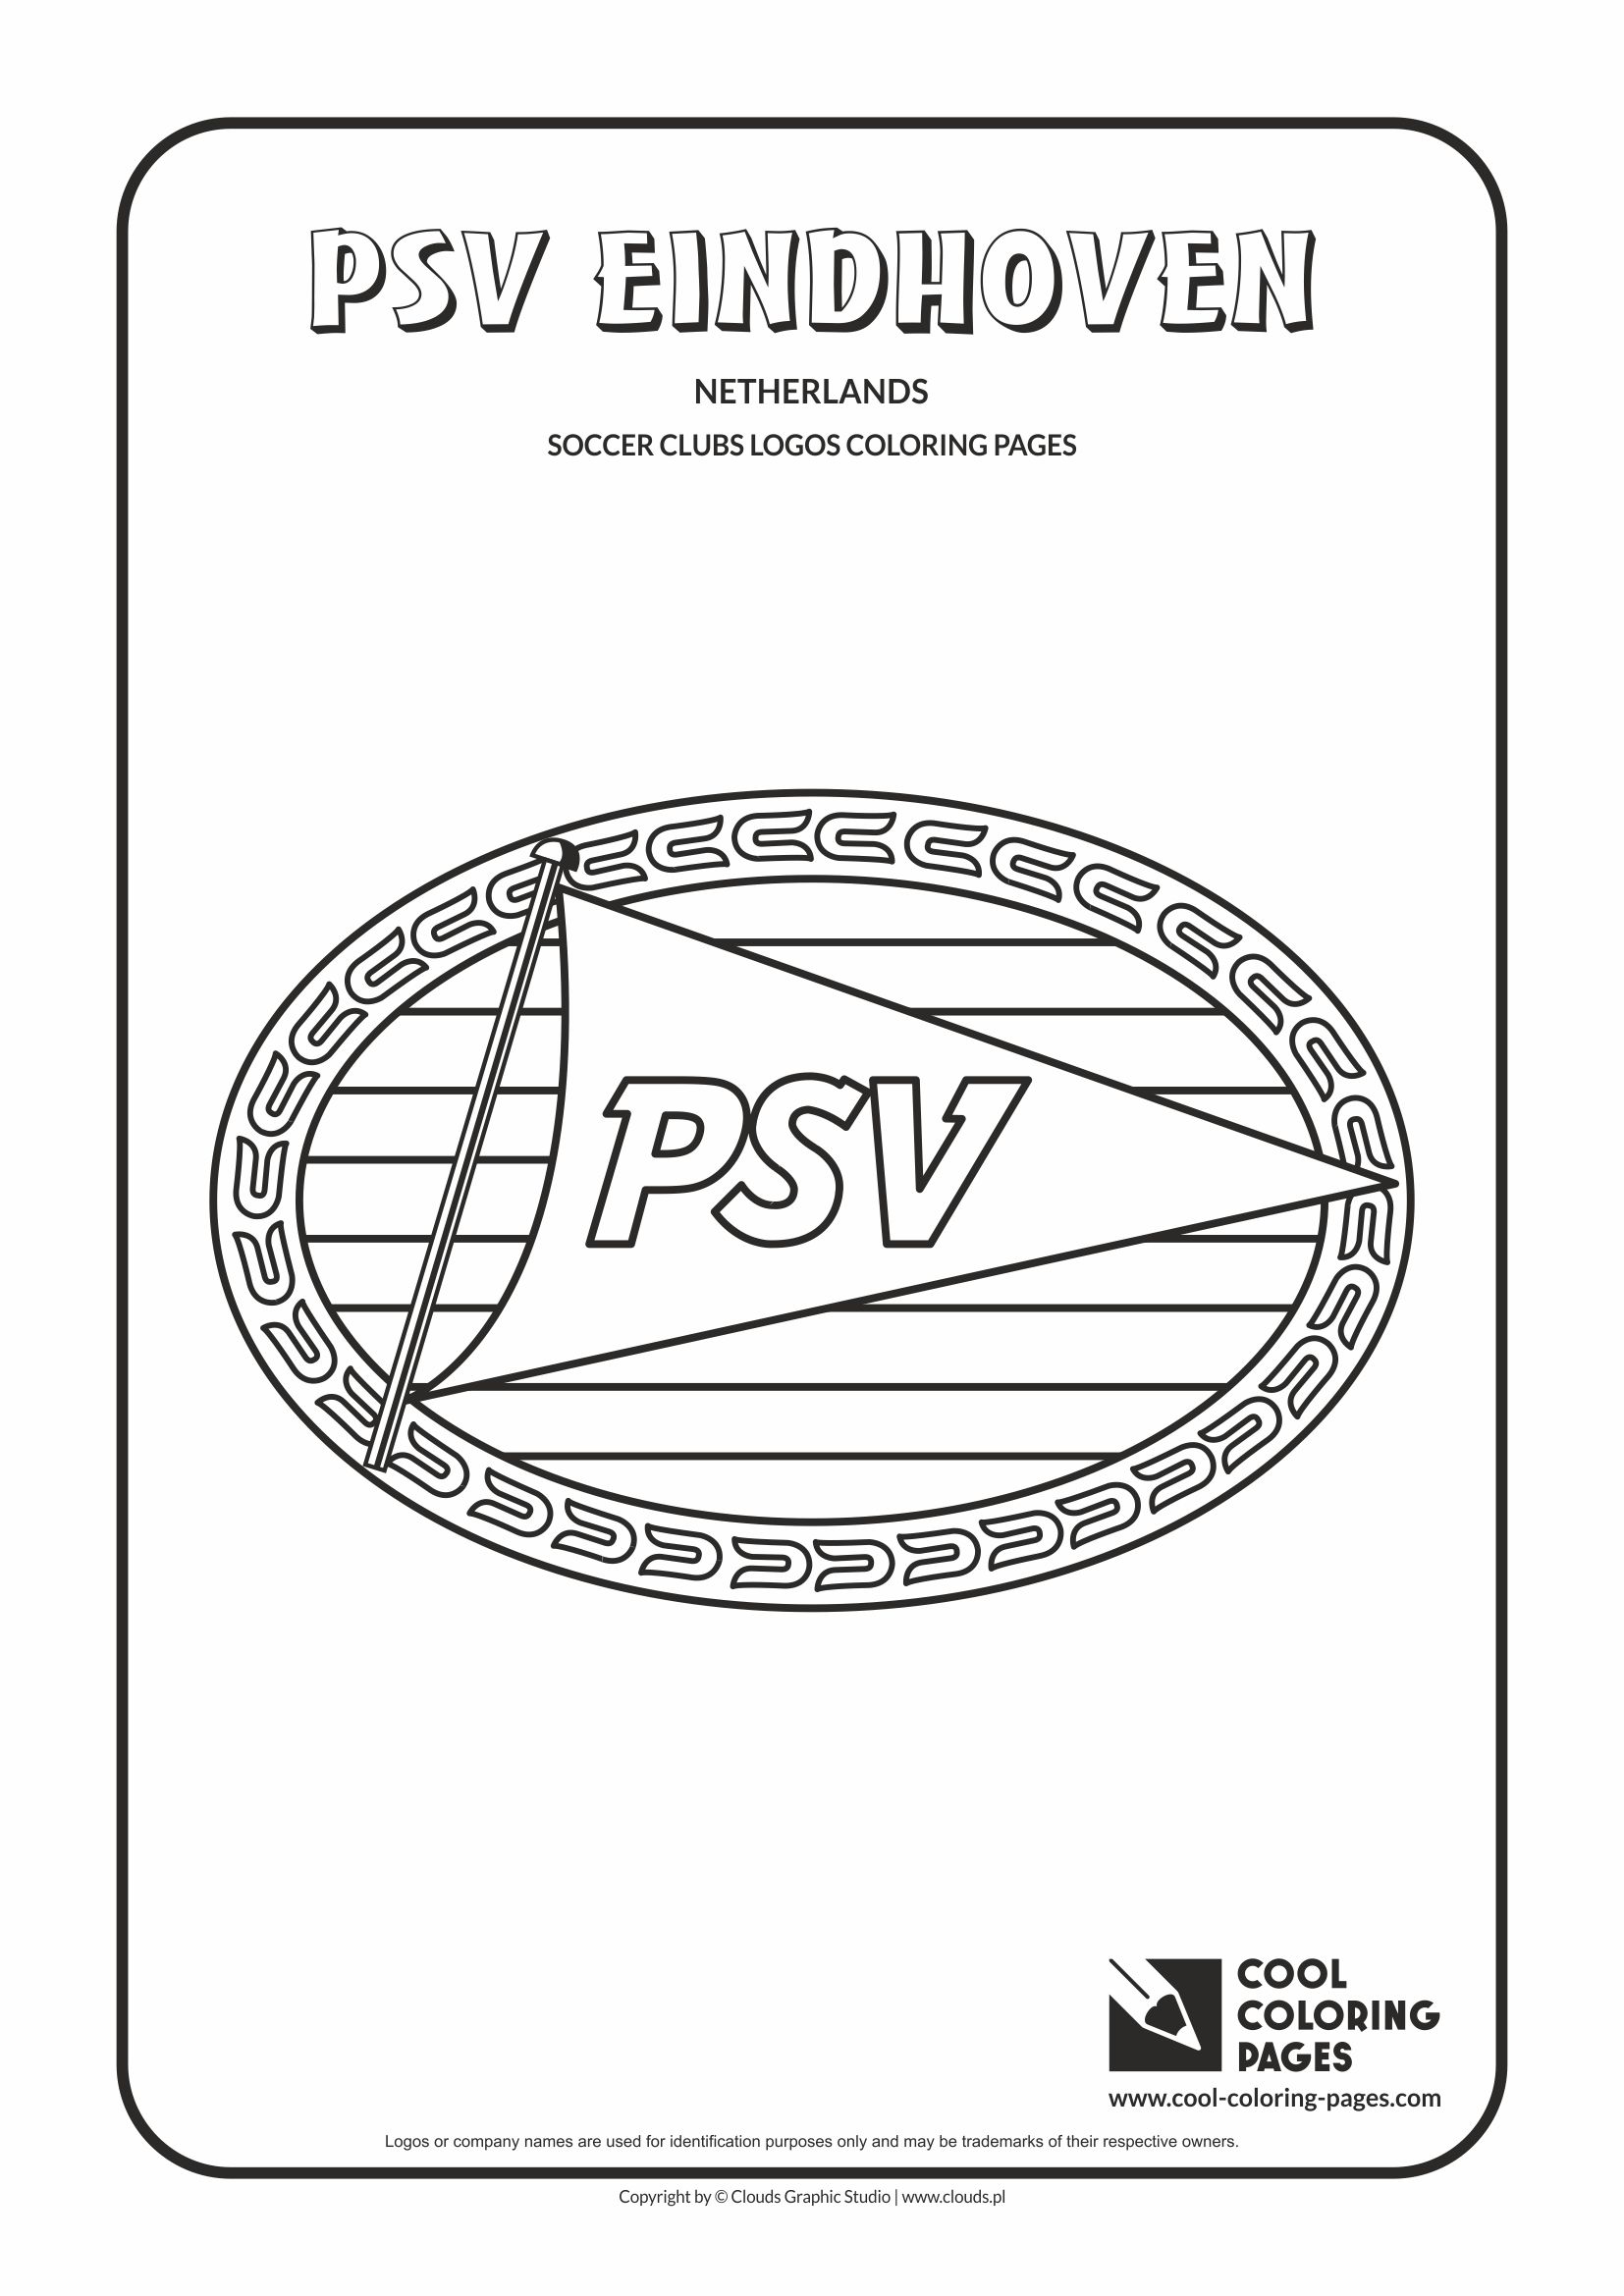 Cool Coloring Pages - Soccer Clubs Logos / PSV Eindhoven logo / Coloring page with PSV Eindhoven logo